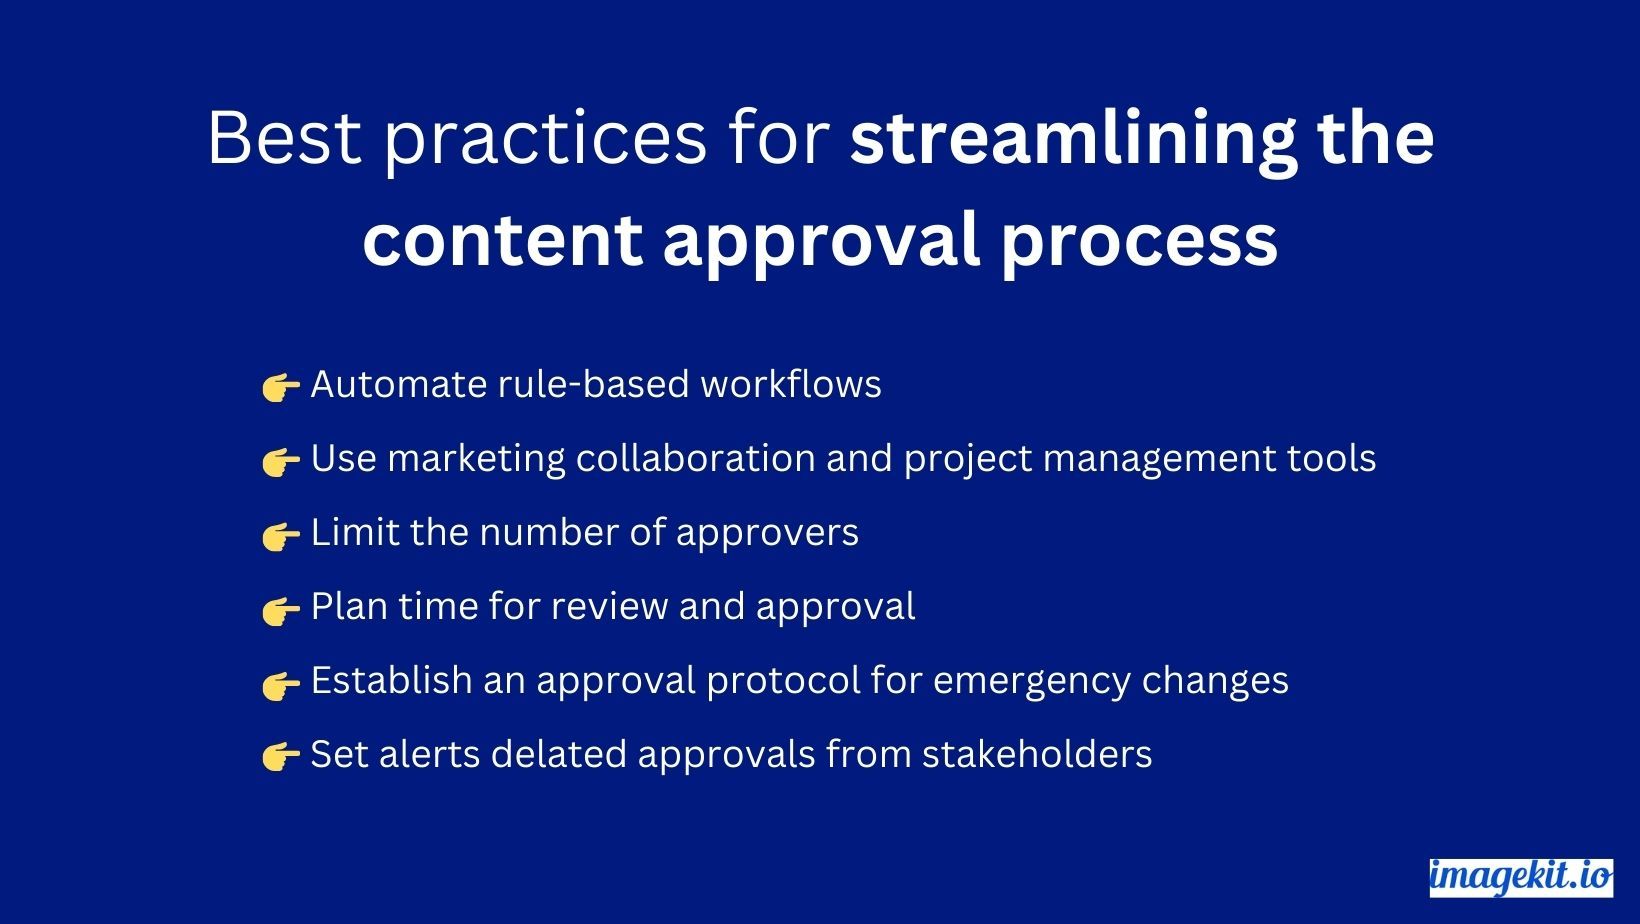 Best practices for streamlining the content approval process - ImageKit blog